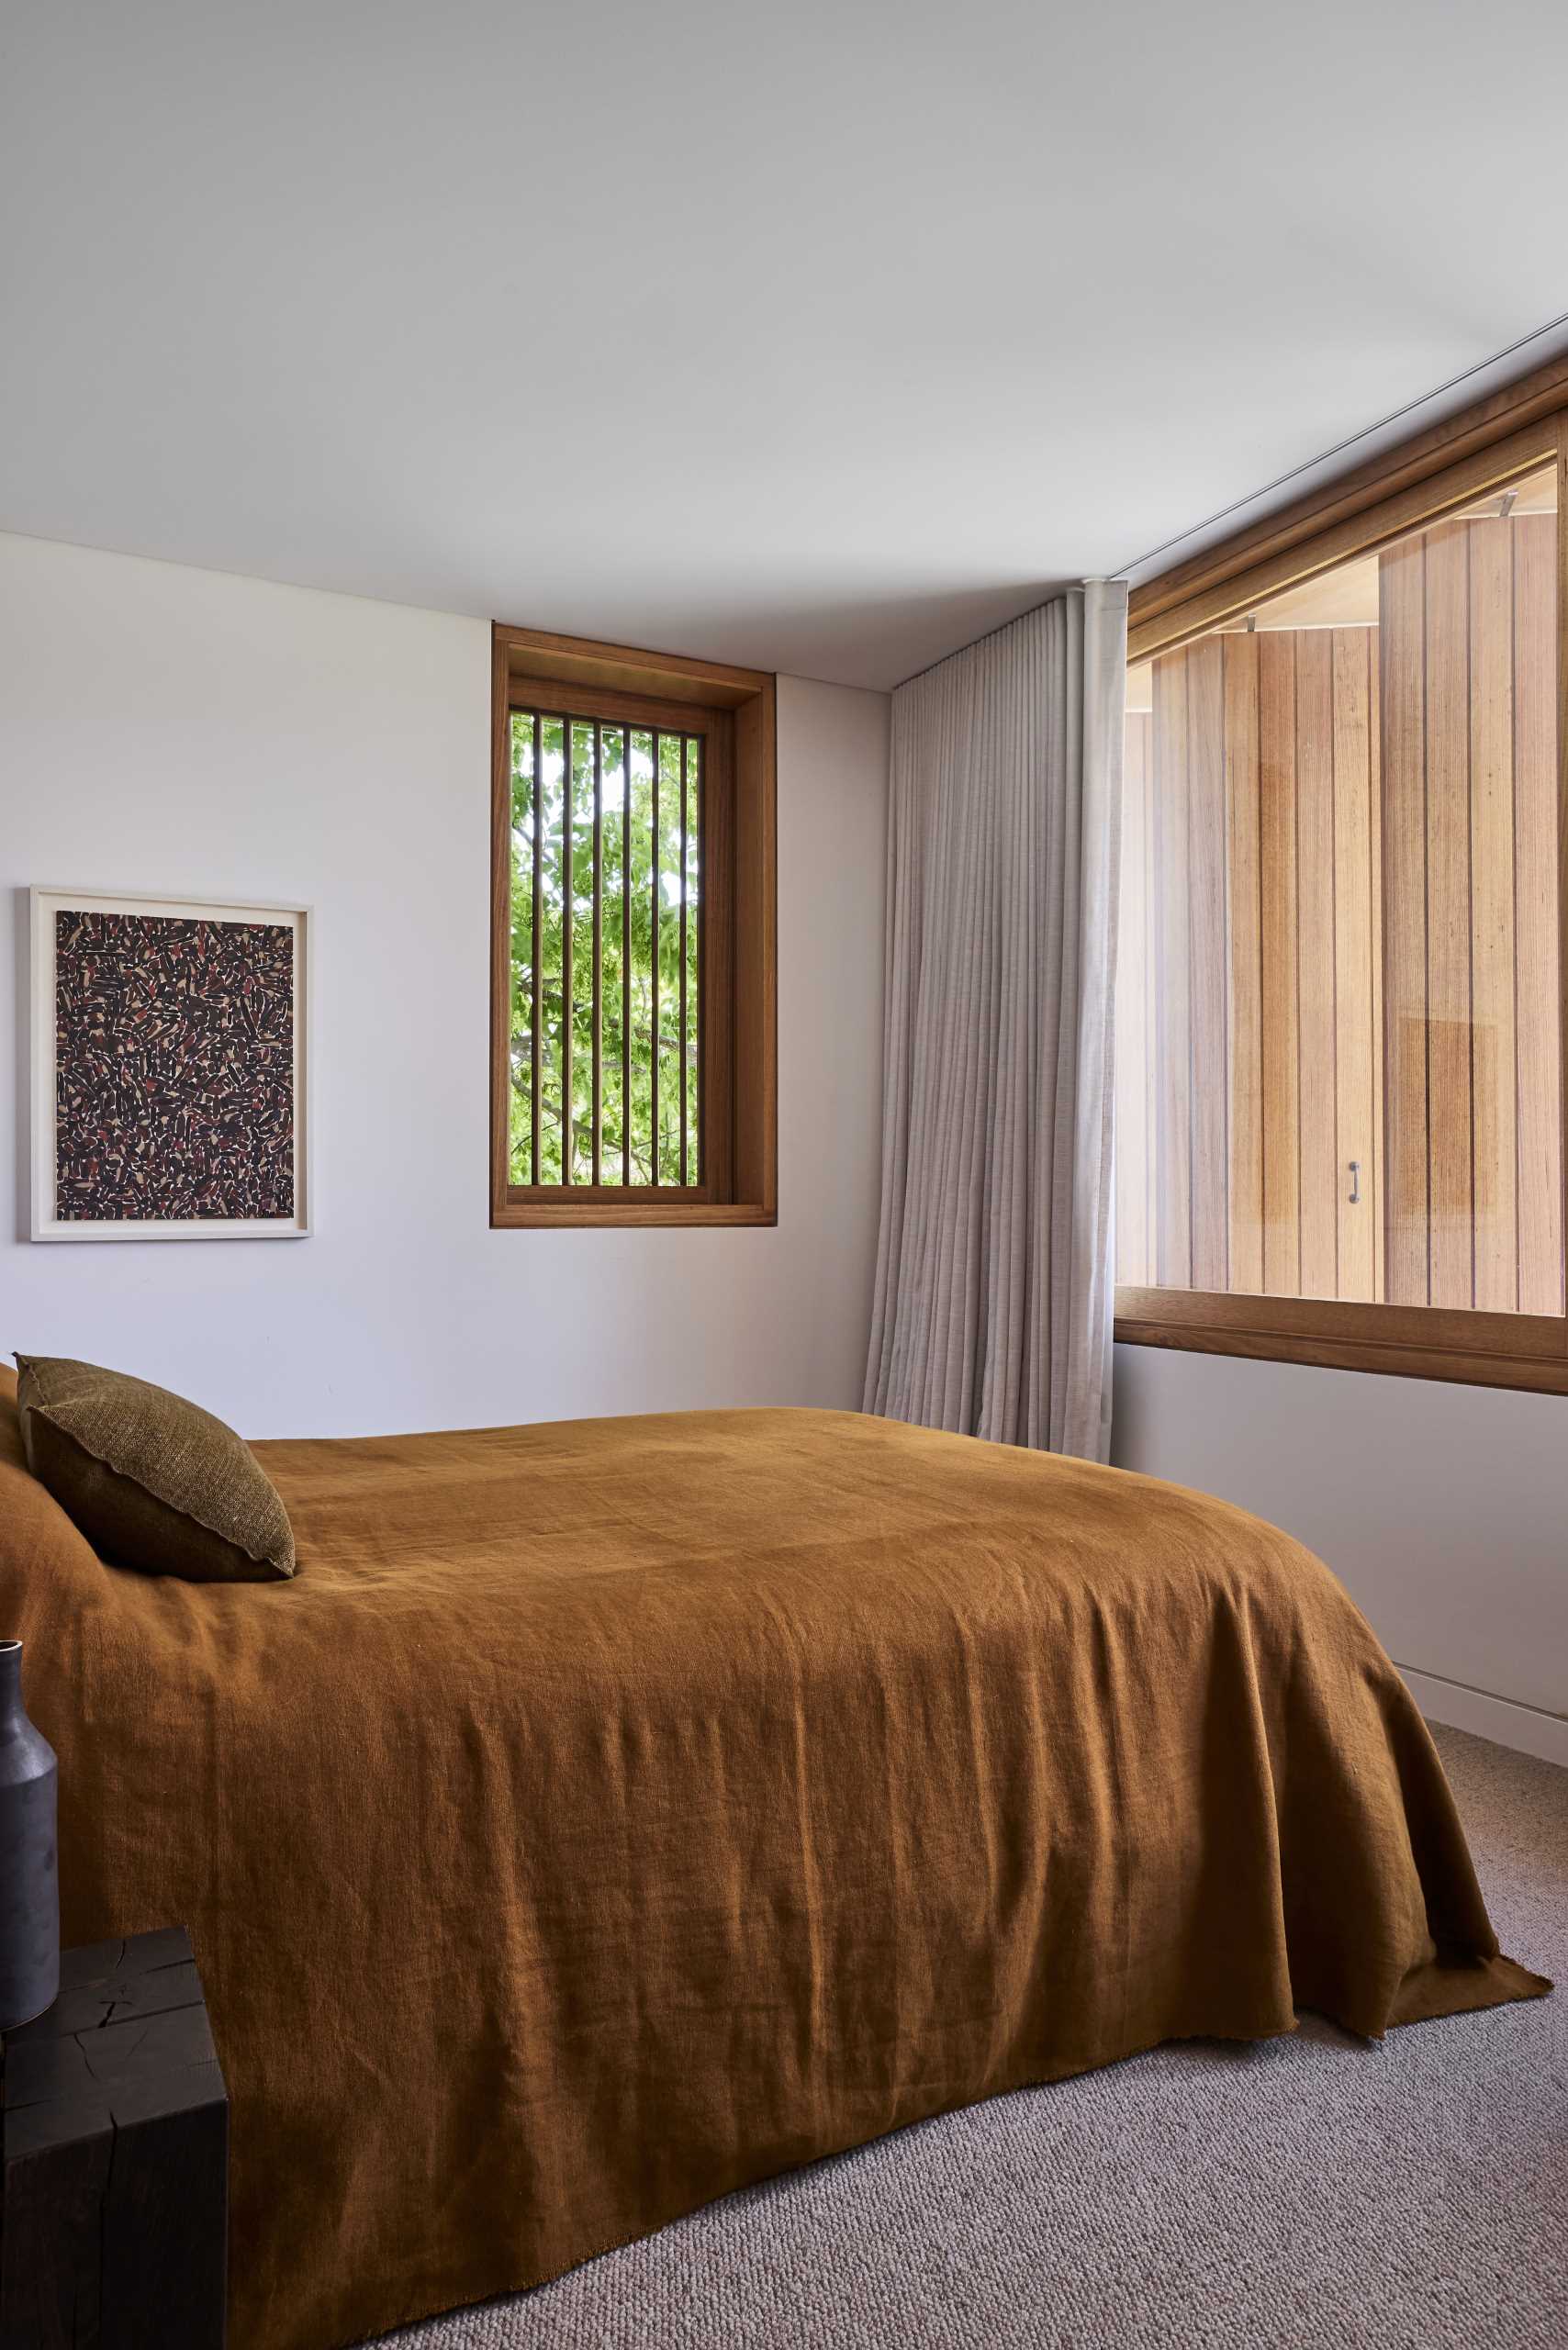 In a bedroom, a large wood-framed picture window is complemented by a smaller window with tree views.